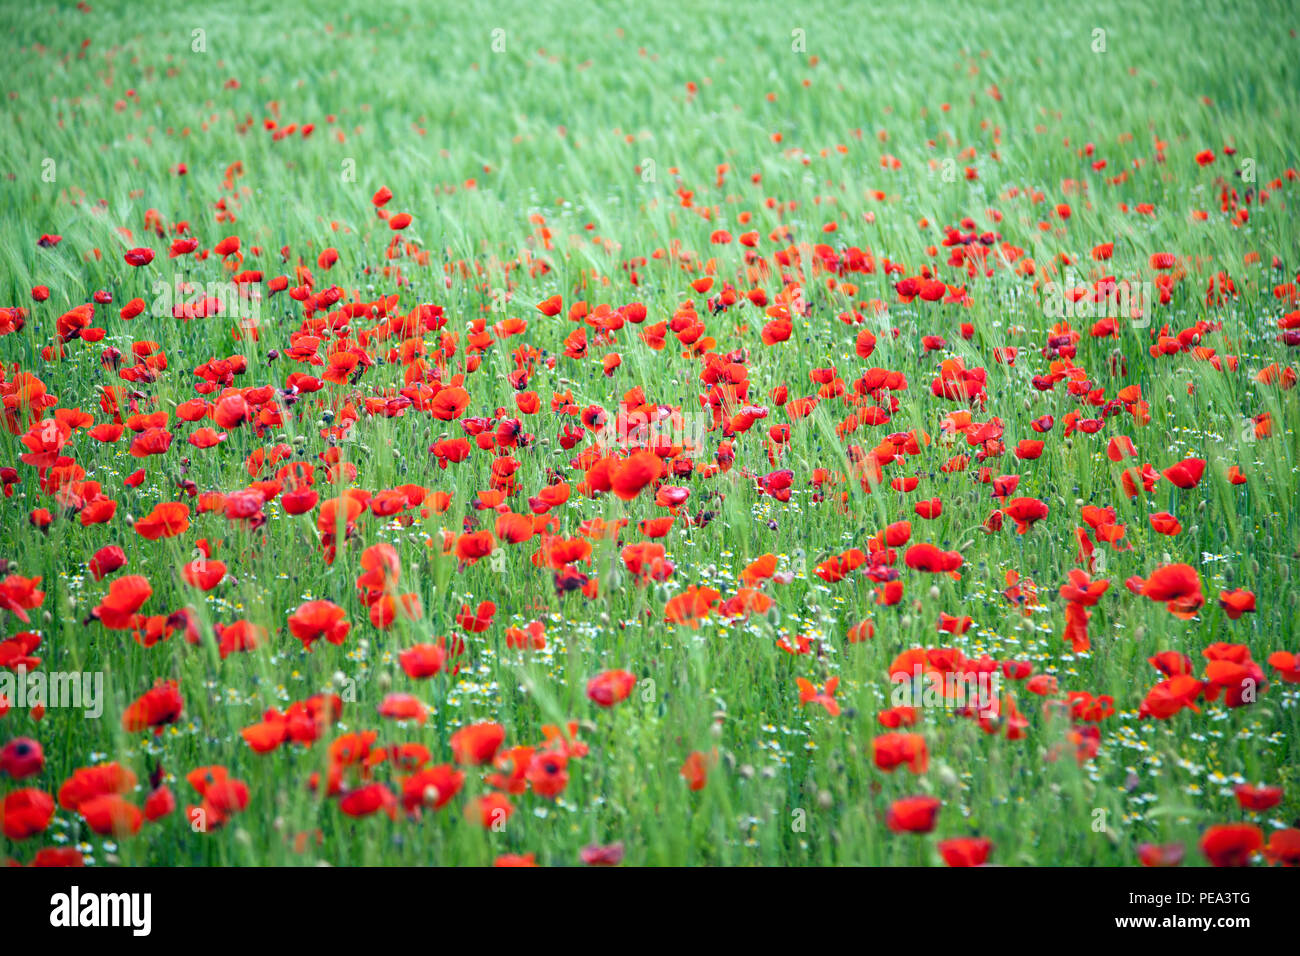 Poppies growing among crops in Yorkshire field Stock Photo - Alamy